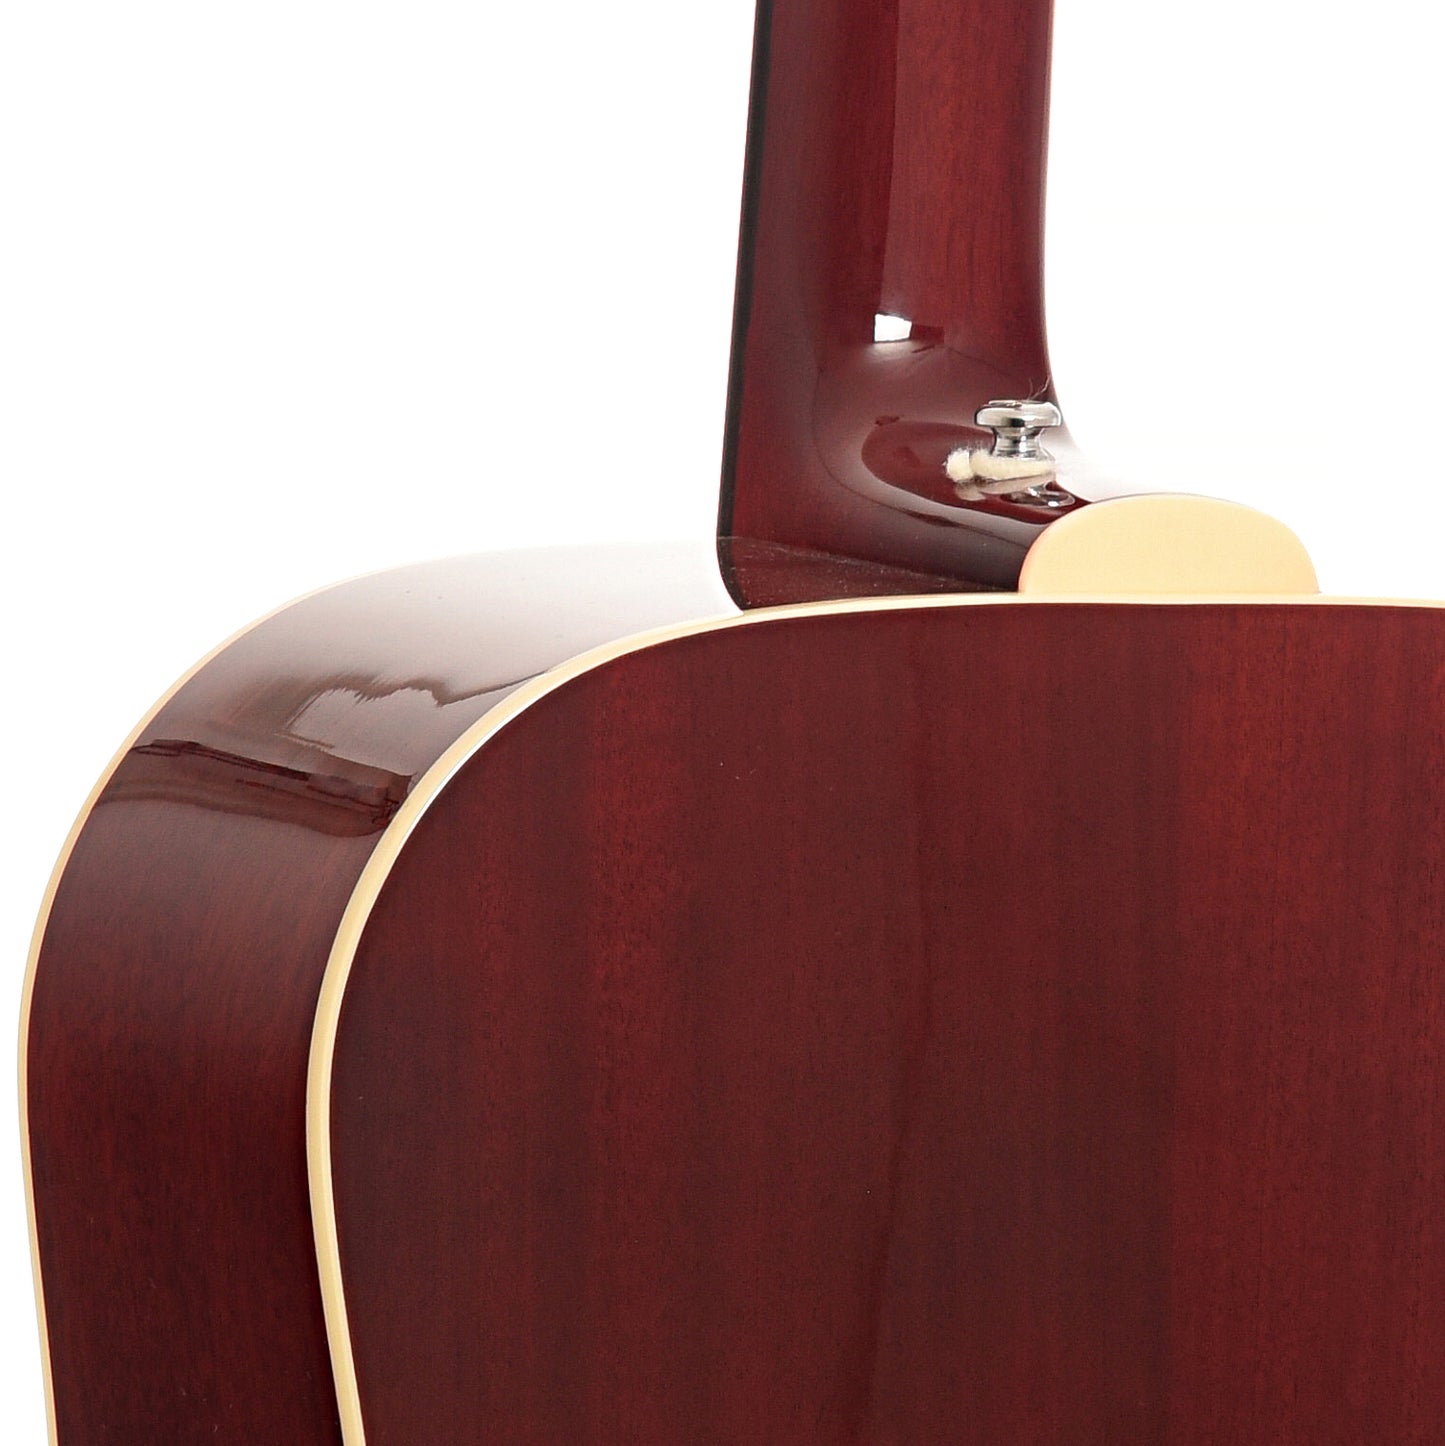 Heel of Guild Westerly Collection D-140 Acoustic Guitar, Cherry Burst